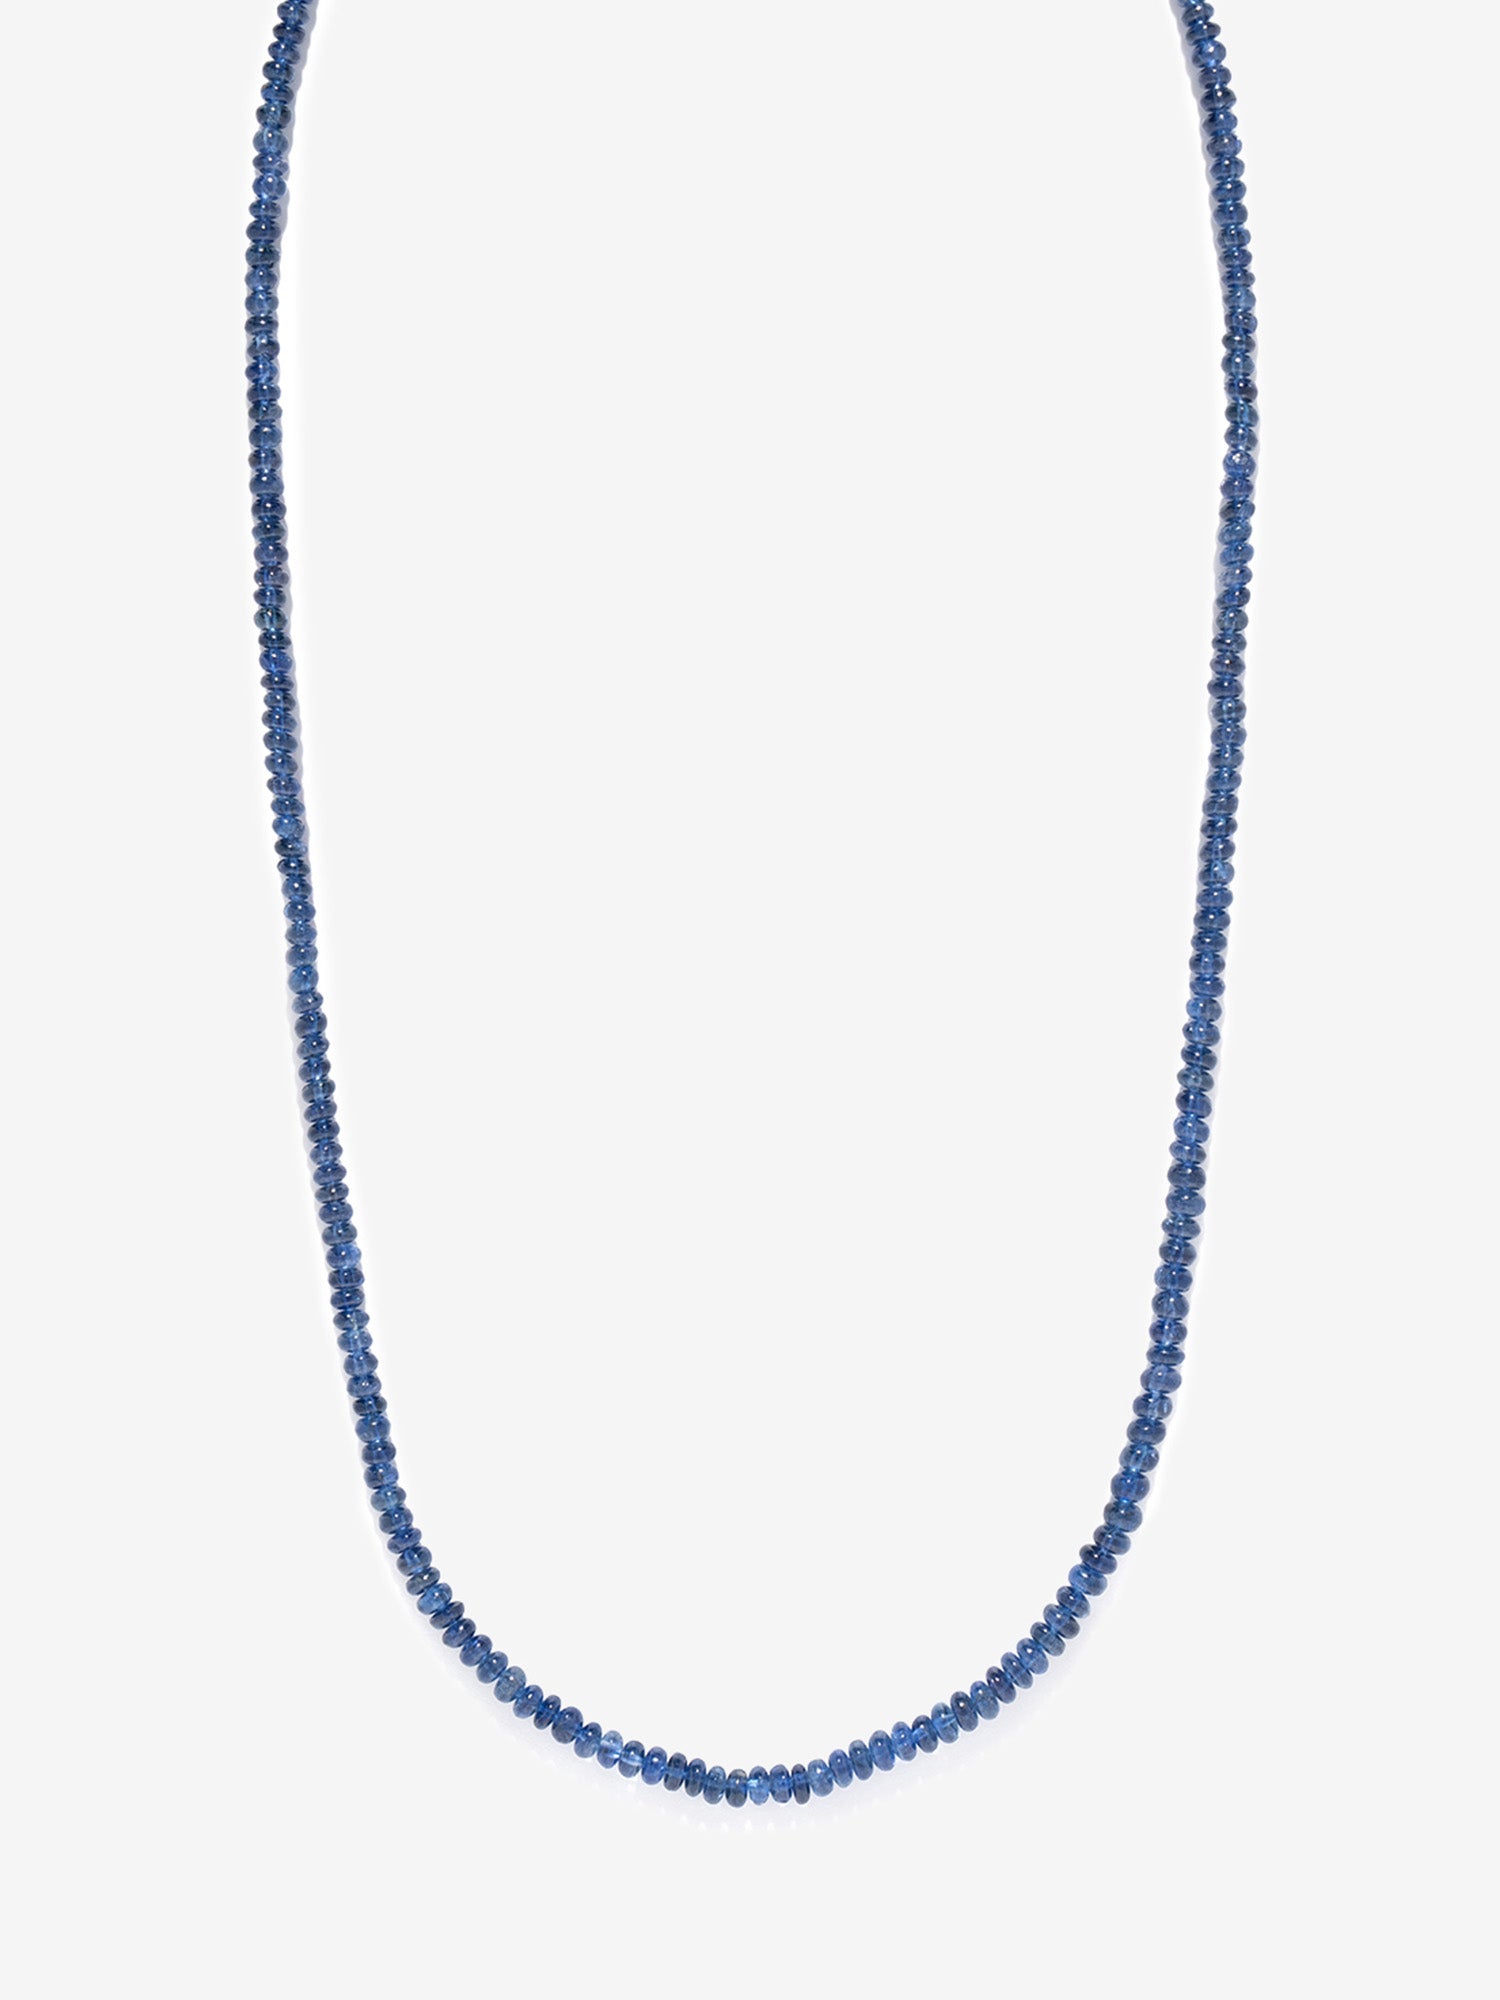 Small Sapphire Bead Necklace